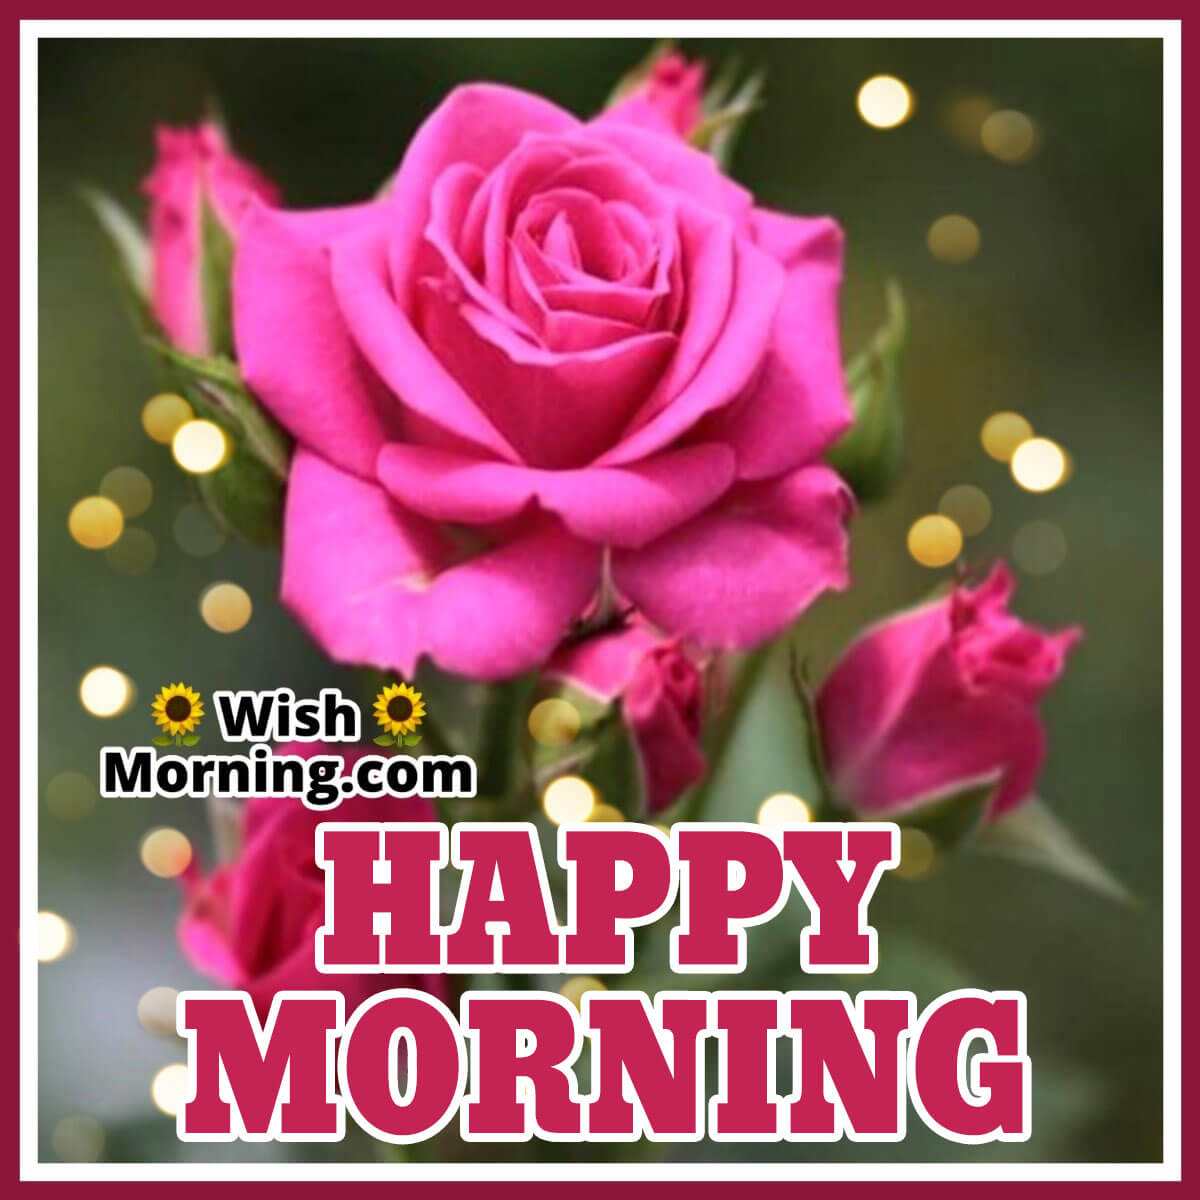 Happy Morning Wish With Rose Flower